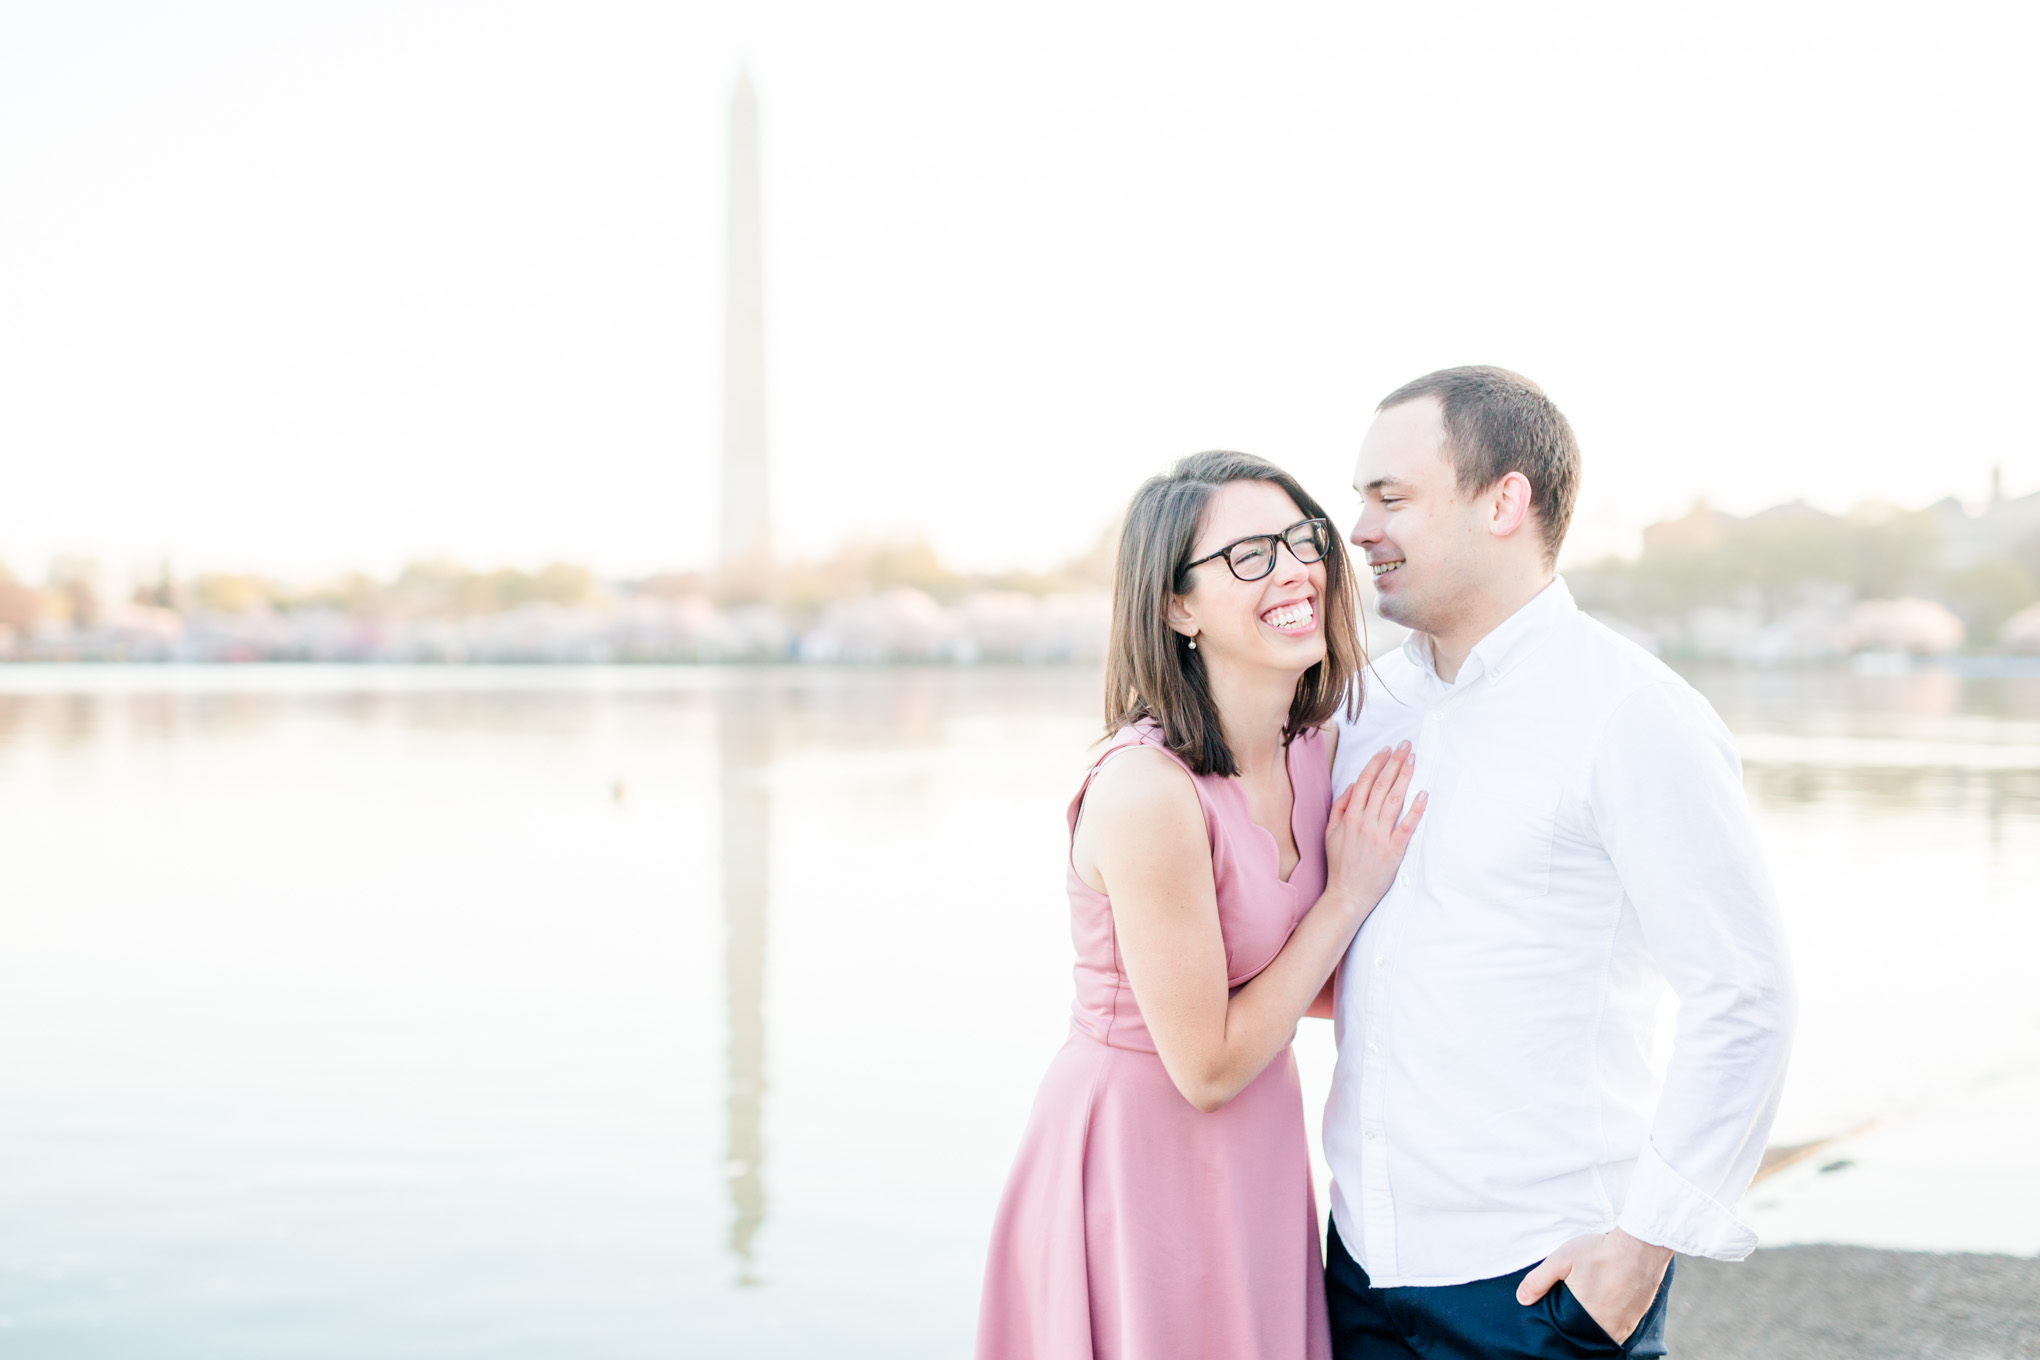 sunny cherry blossoms engagement session, Washington, D.C. engagement photos, Washington D.C. engagement photos, sunrrise engagement photos, cherry blossom engagement photos, D.C. cherry bloossoms, D.C. cherry blossoms photos, cherry blossom photos, cherry blossoms portrraits, sunny engagement photos, classic engagement photos, Rachel E.H. Photography, engagement session style, tidal basin